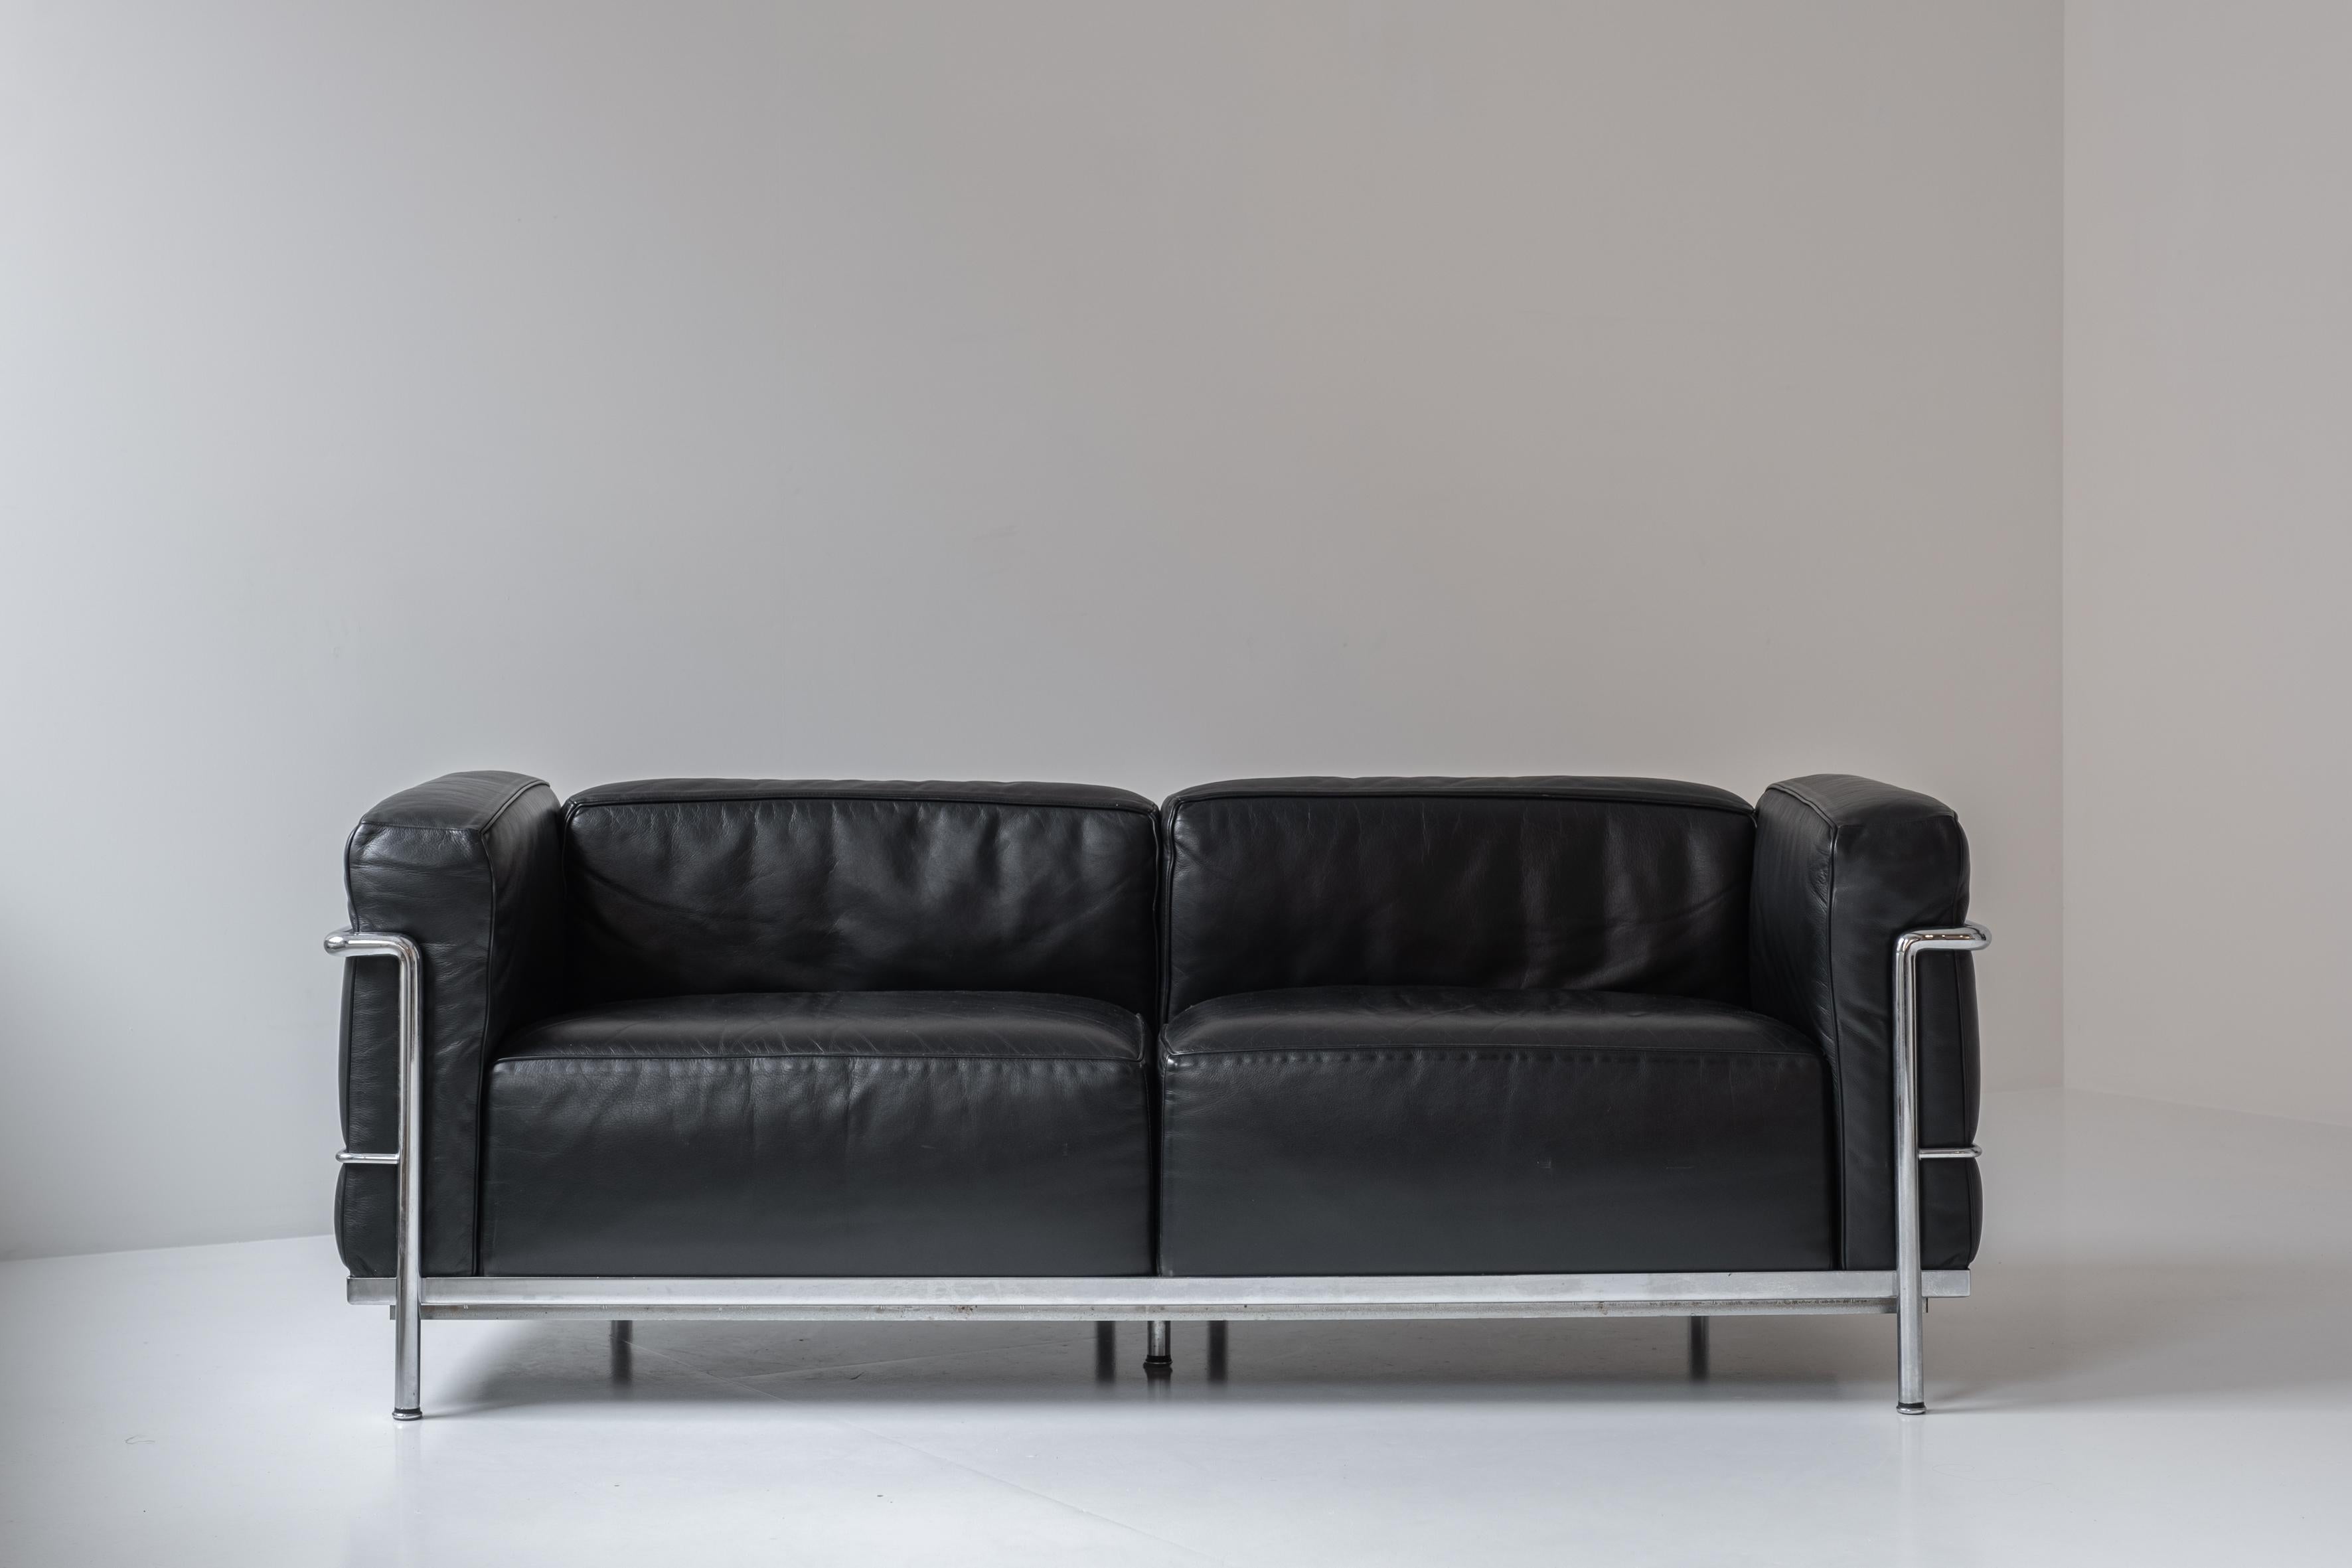 Iconic ‘LC3’ sofa designed by Le Corbusier, Pierre Jeanneret and Charlotte Perriand for Cassina. Originally designed in 1928, our example is a vintage edition from the 1990s. Very good original condition. Signed.